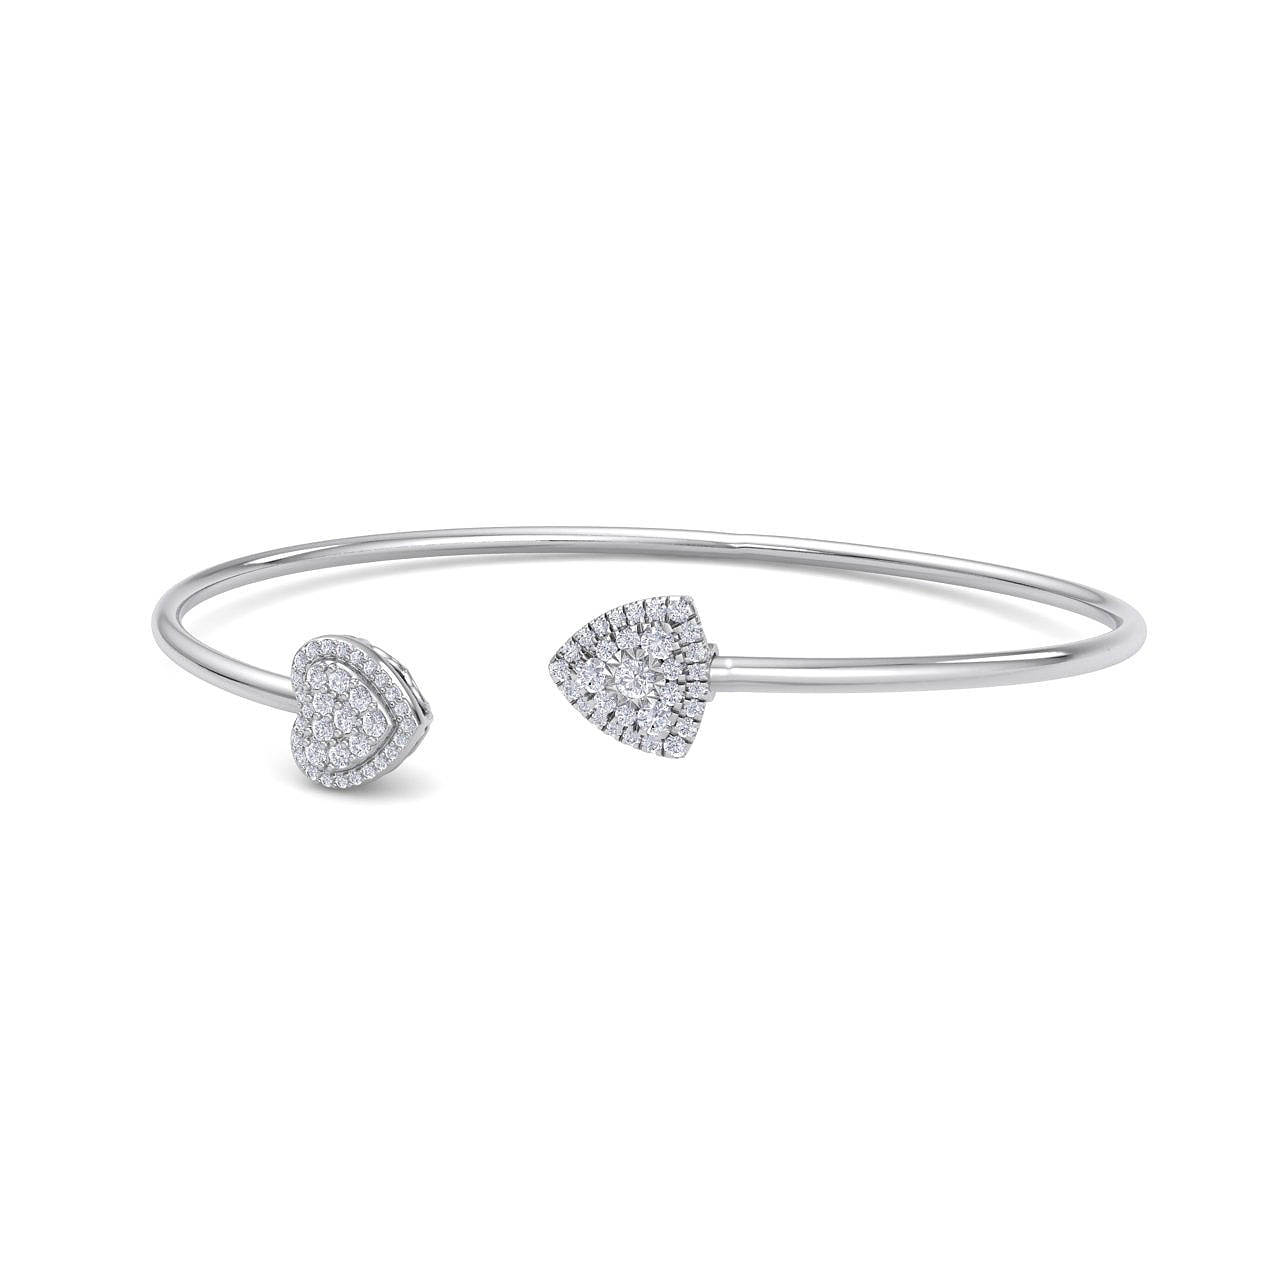 Bracelet in white gold with white diamonds of 0.39 ct in weight